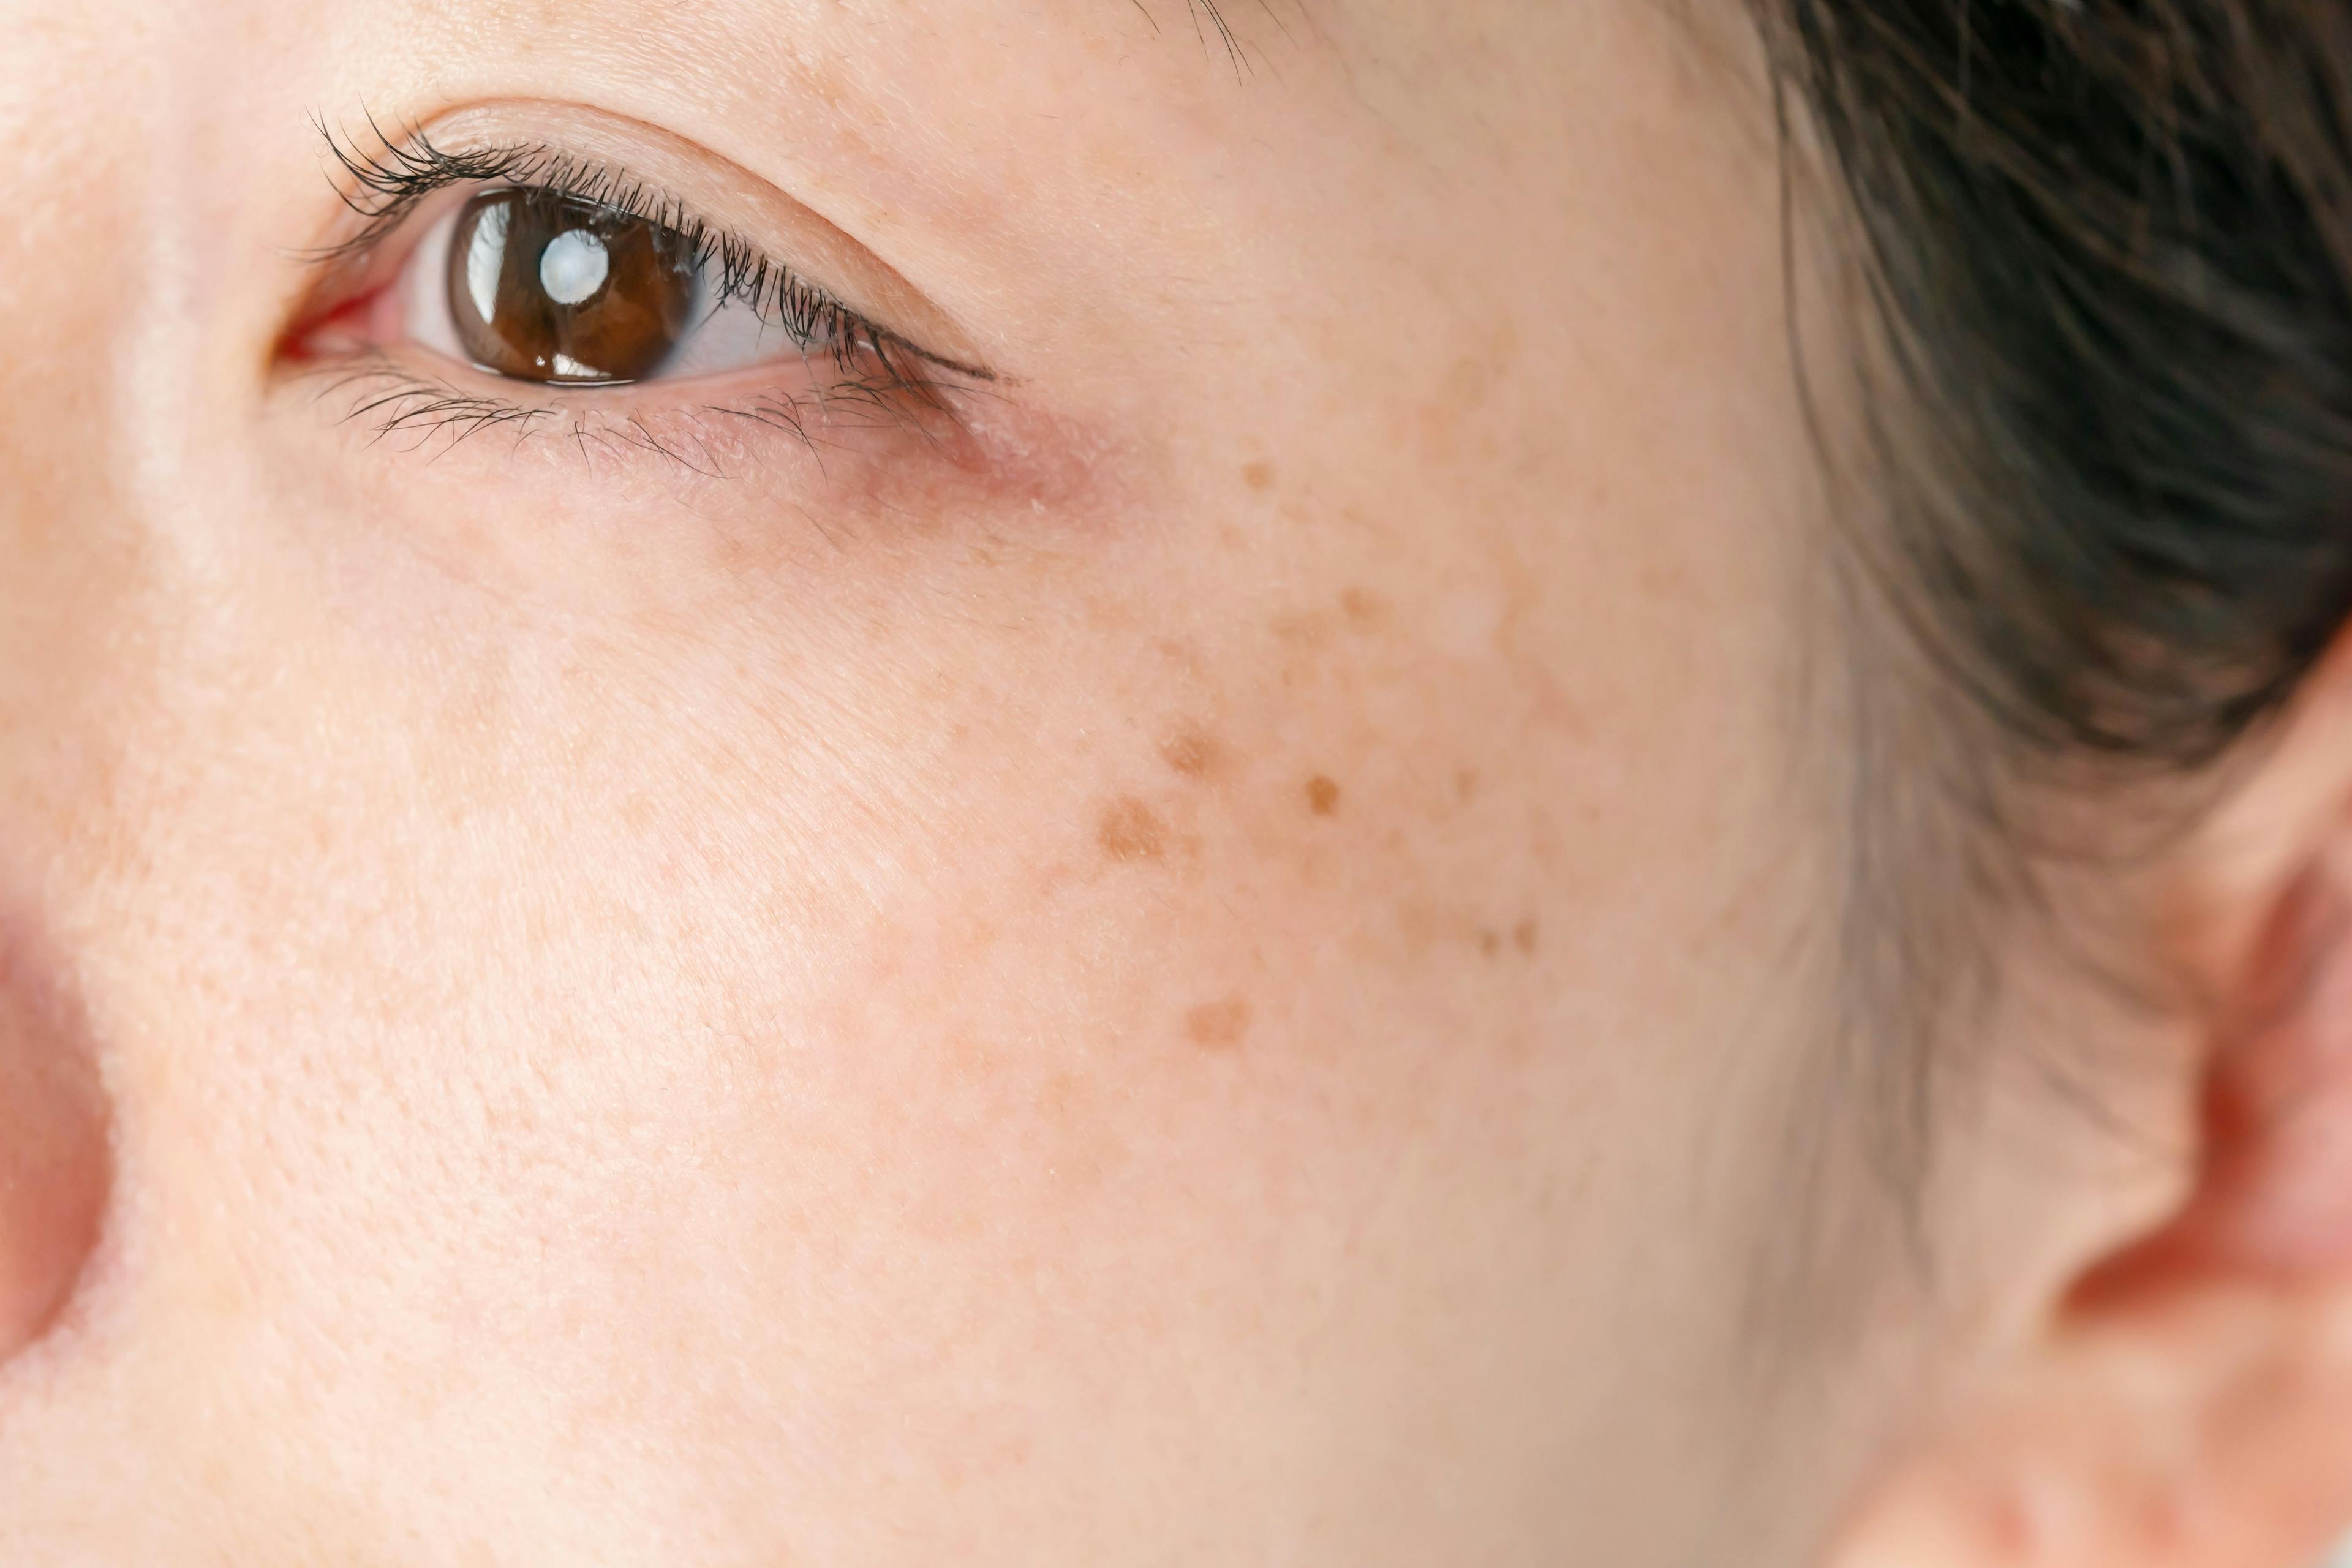 Reviewing Common and Prevalent Dermatoses in AAPI Patients